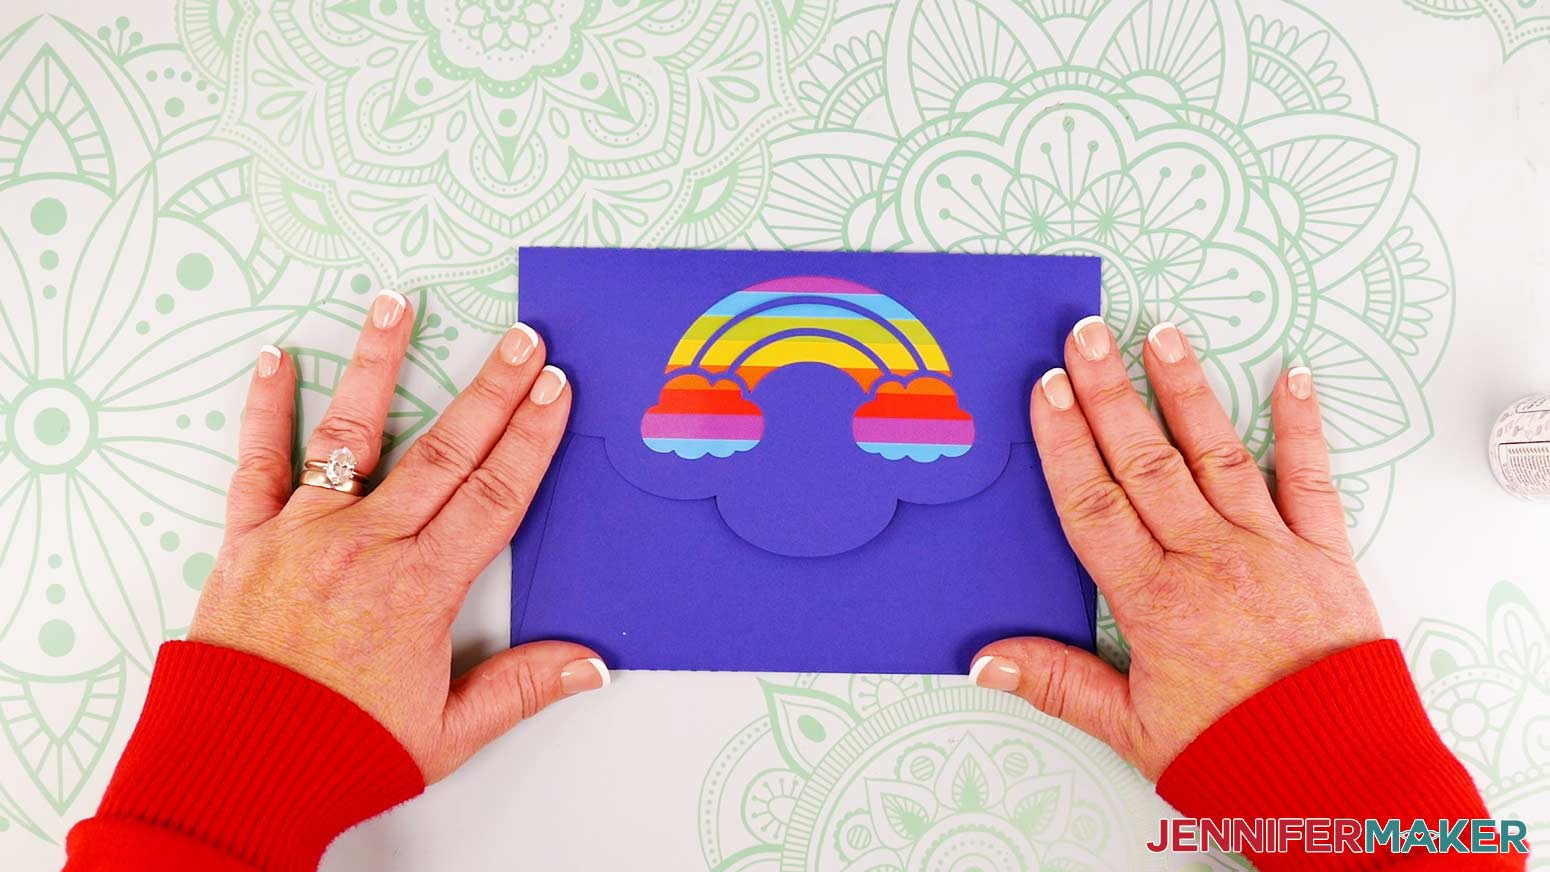 The assembled waterfall card envelope with the flap closed, showing the rainbow liner through the rainbow design cutout.